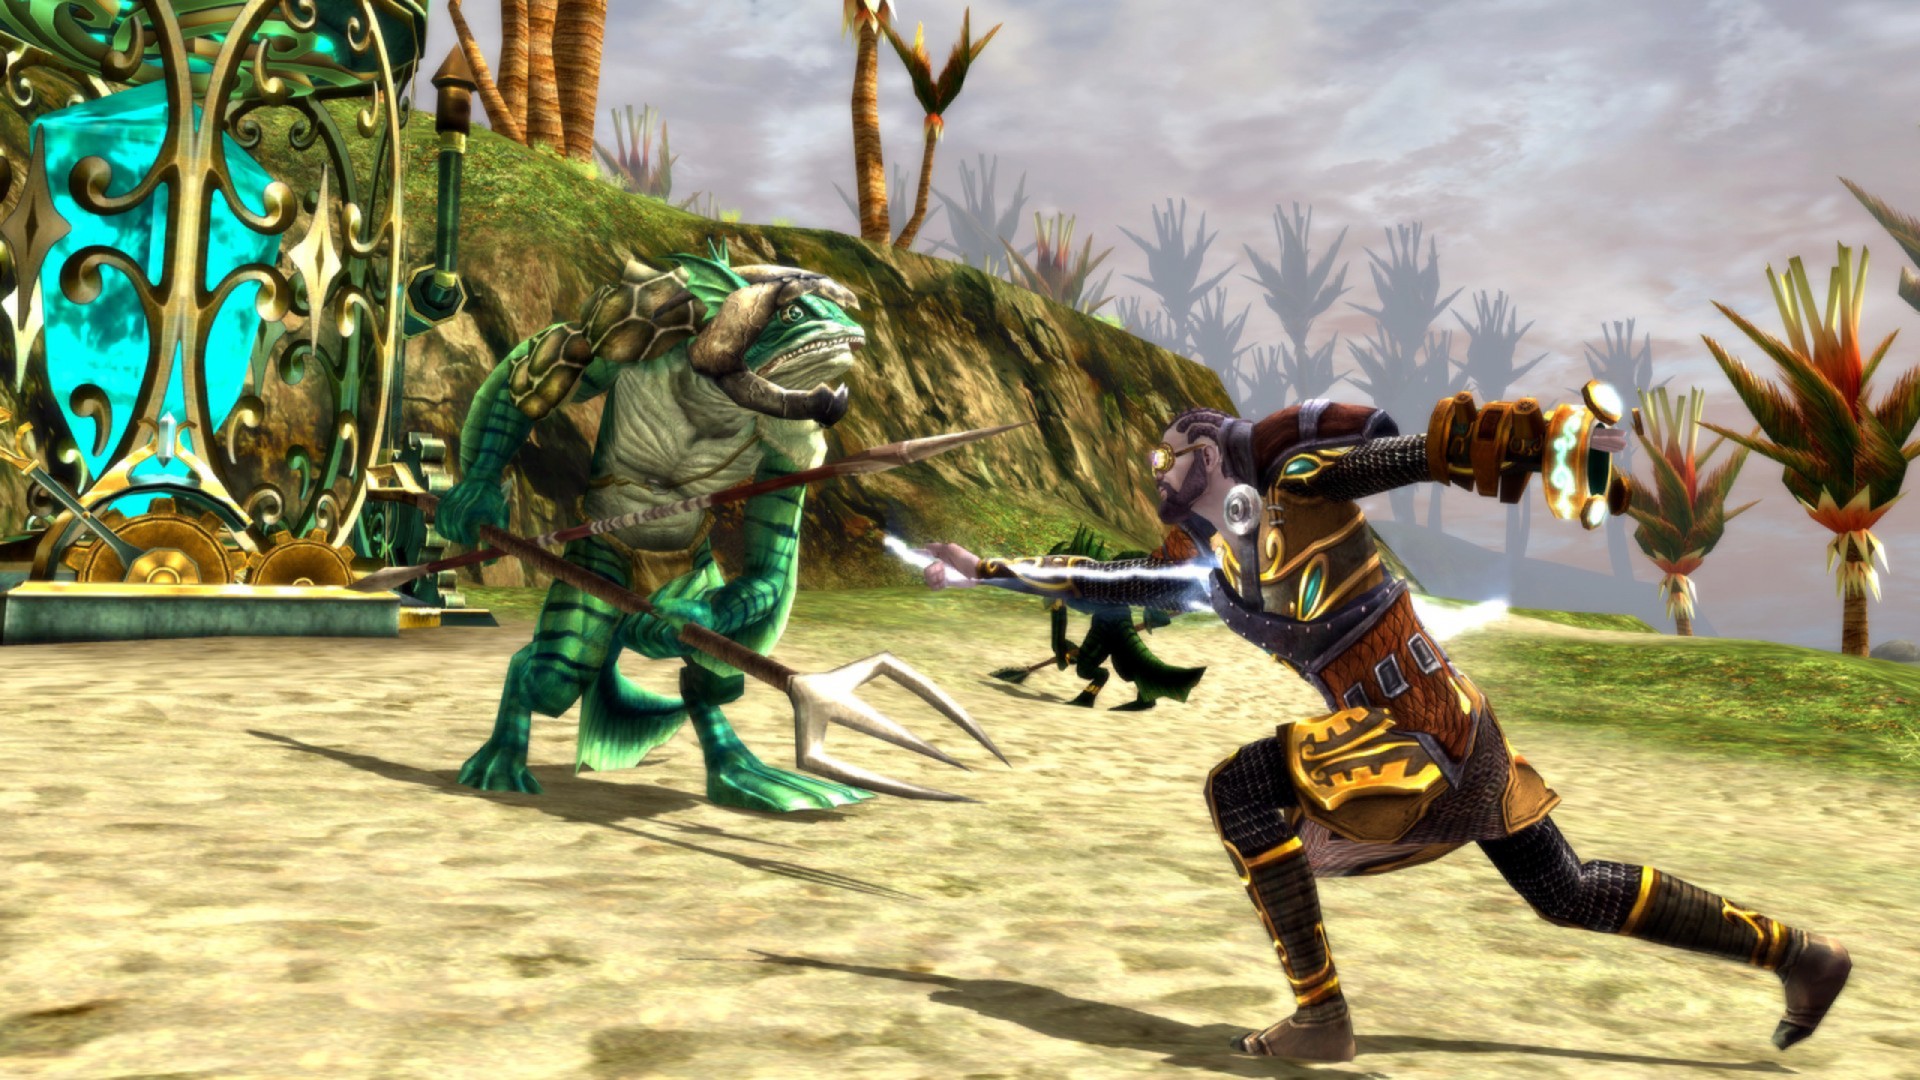 dungeons-and-dragons-online-free-to-play-game-on-steam-mmorpg